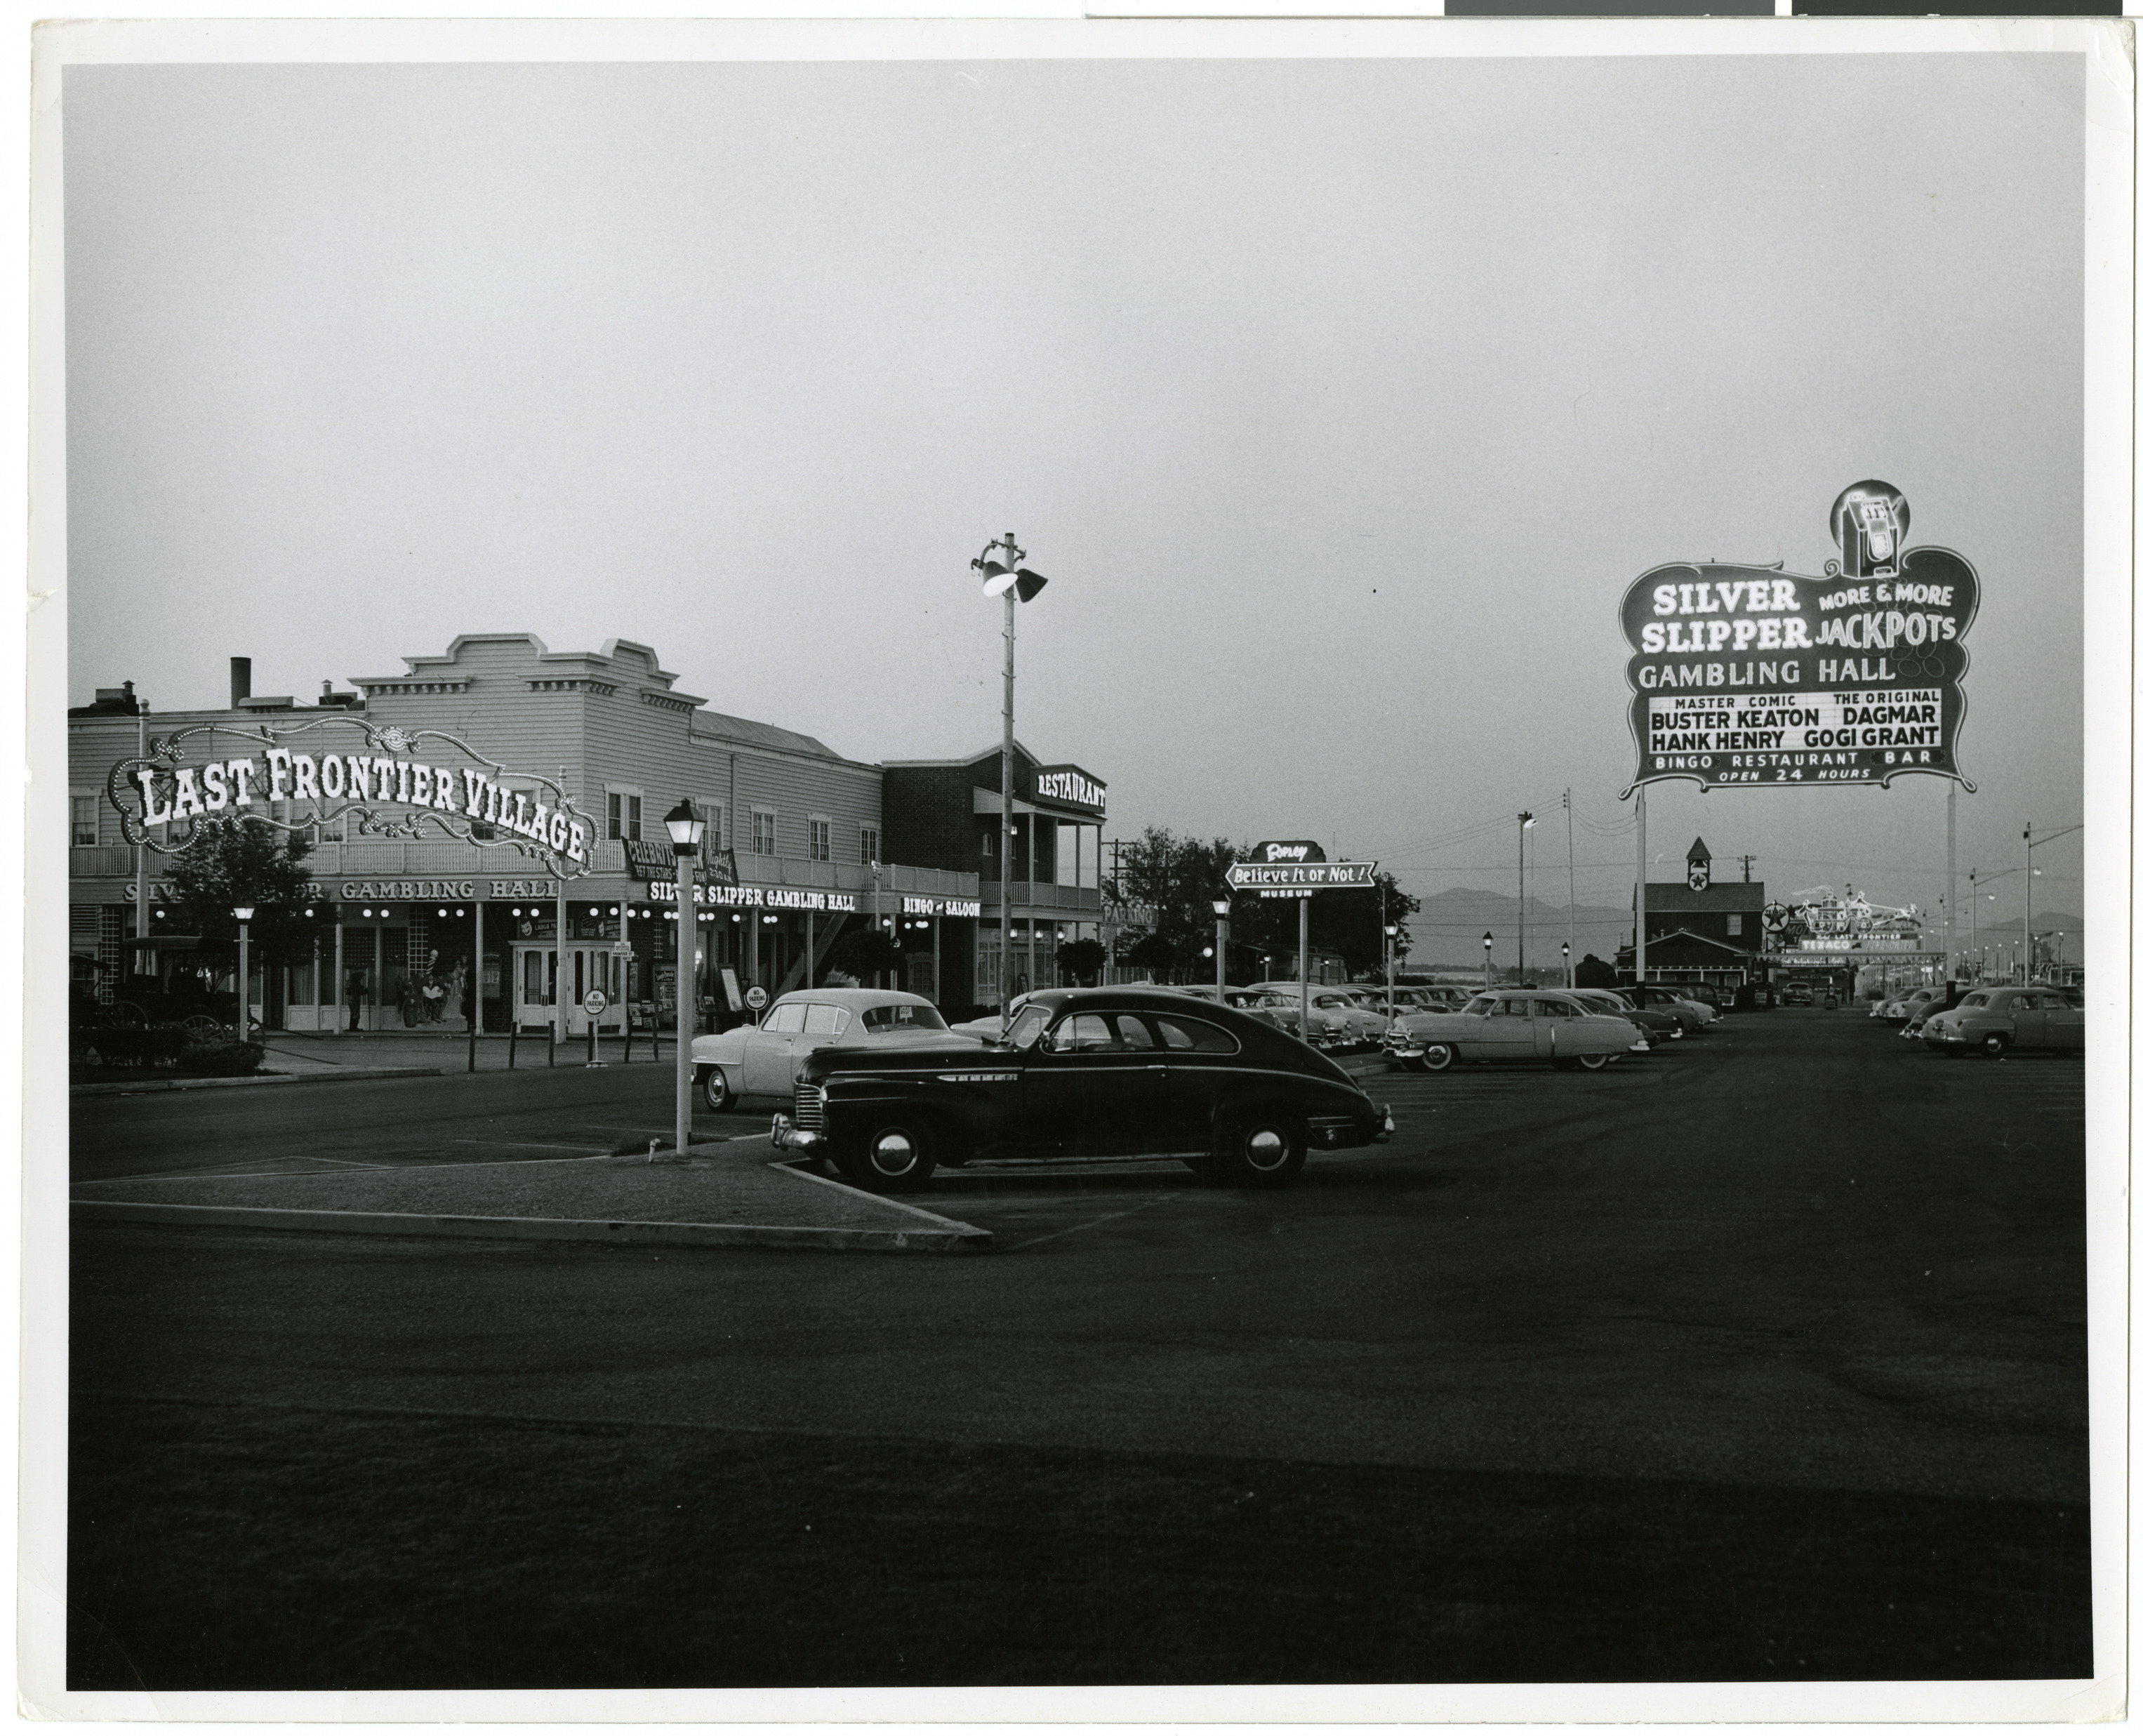 Photograph of the entrance to the Last Frontier Village at twilight (Las Vegas), circa early 1950s